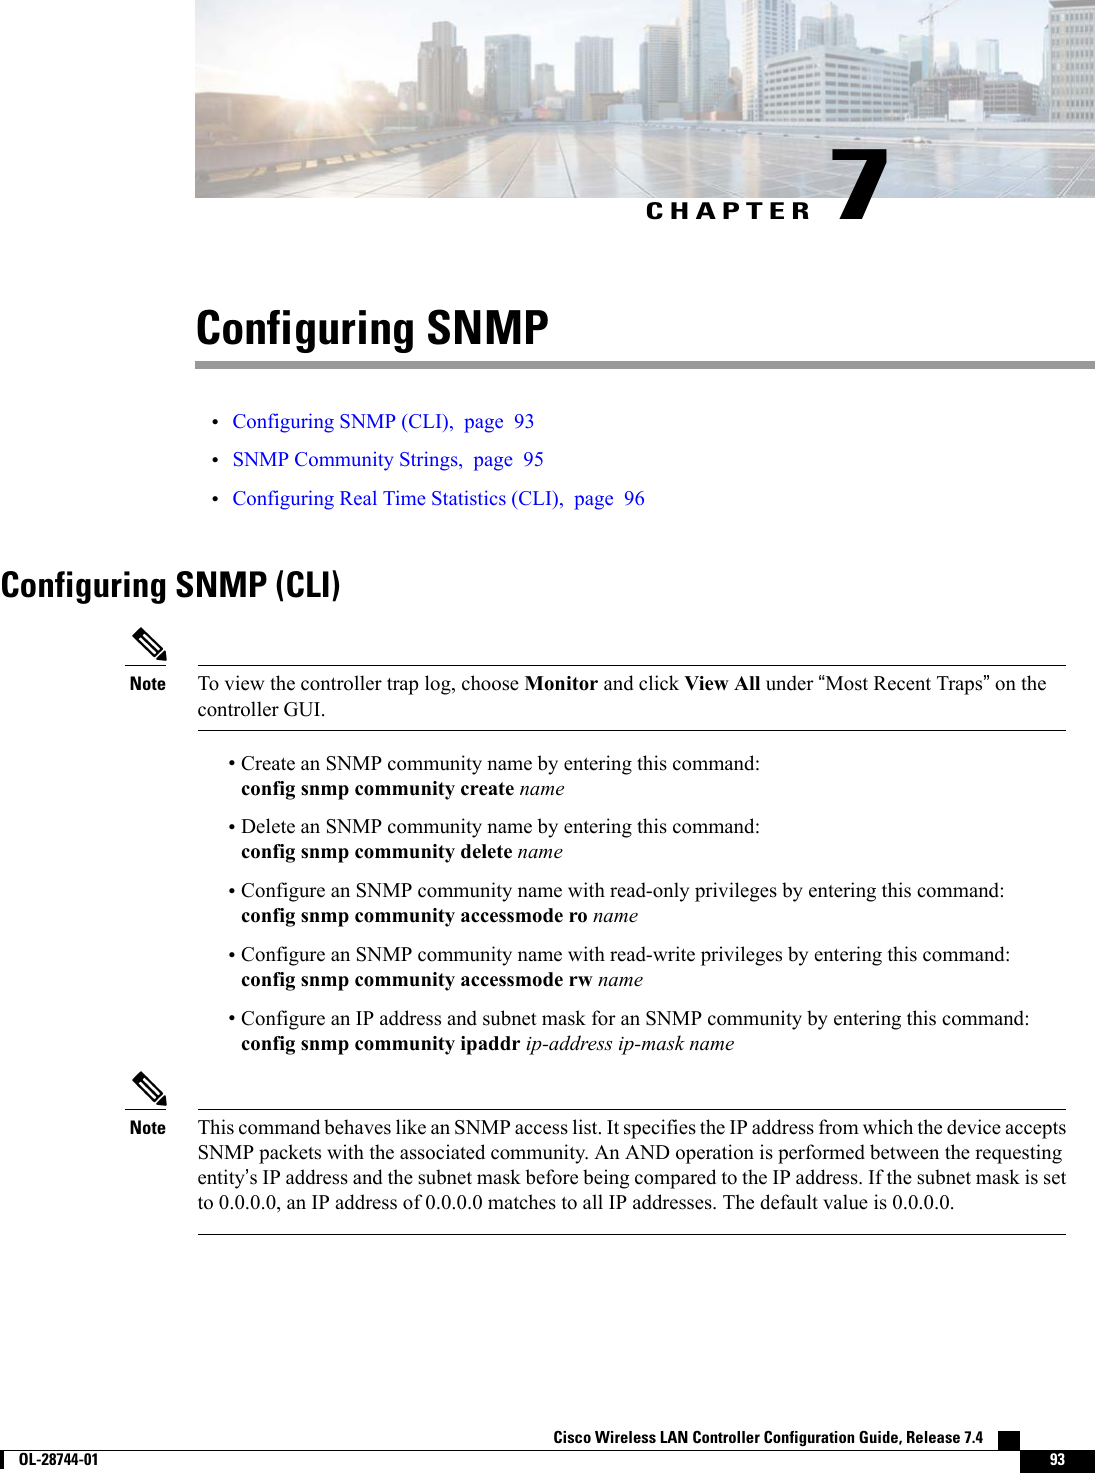 CHAPTER 7Configuring SNMP•Configuring SNMP (CLI), page 93•SNMP Community Strings, page 95•Configuring Real Time Statistics (CLI), page 96Configuring SNMP (CLI)To view the controller trap log, choose Monitor and click View All under “Most Recent Traps”on thecontroller GUI.Note•Create an SNMP community name by entering this command:config snmp community create name•Delete an SNMP community name by entering this command:config snmp community delete name•Configure an SNMP community name with read-only privileges by entering this command:config snmp community accessmode ro name•Configure an SNMP community name with read-write privileges by entering this command:config snmp community accessmode rw name•Configure an IP address and subnet mask for an SNMP community by entering this command:config snmp community ipaddr ip-address ip-mask nameThis command behaves like an SNMP access list. It specifies the IP address from which the device acceptsSNMP packets with the associated community. An AND operation is performed between the requestingentity’s IP address and the subnet mask before being compared to the IP address. If the subnet mask is setto 0.0.0.0, an IP address of 0.0.0.0 matches to all IP addresses. The default value is 0.0.0.0.NoteCisco Wireless LAN Controller Configuration Guide, Release 7.4        OL-28744-01 93